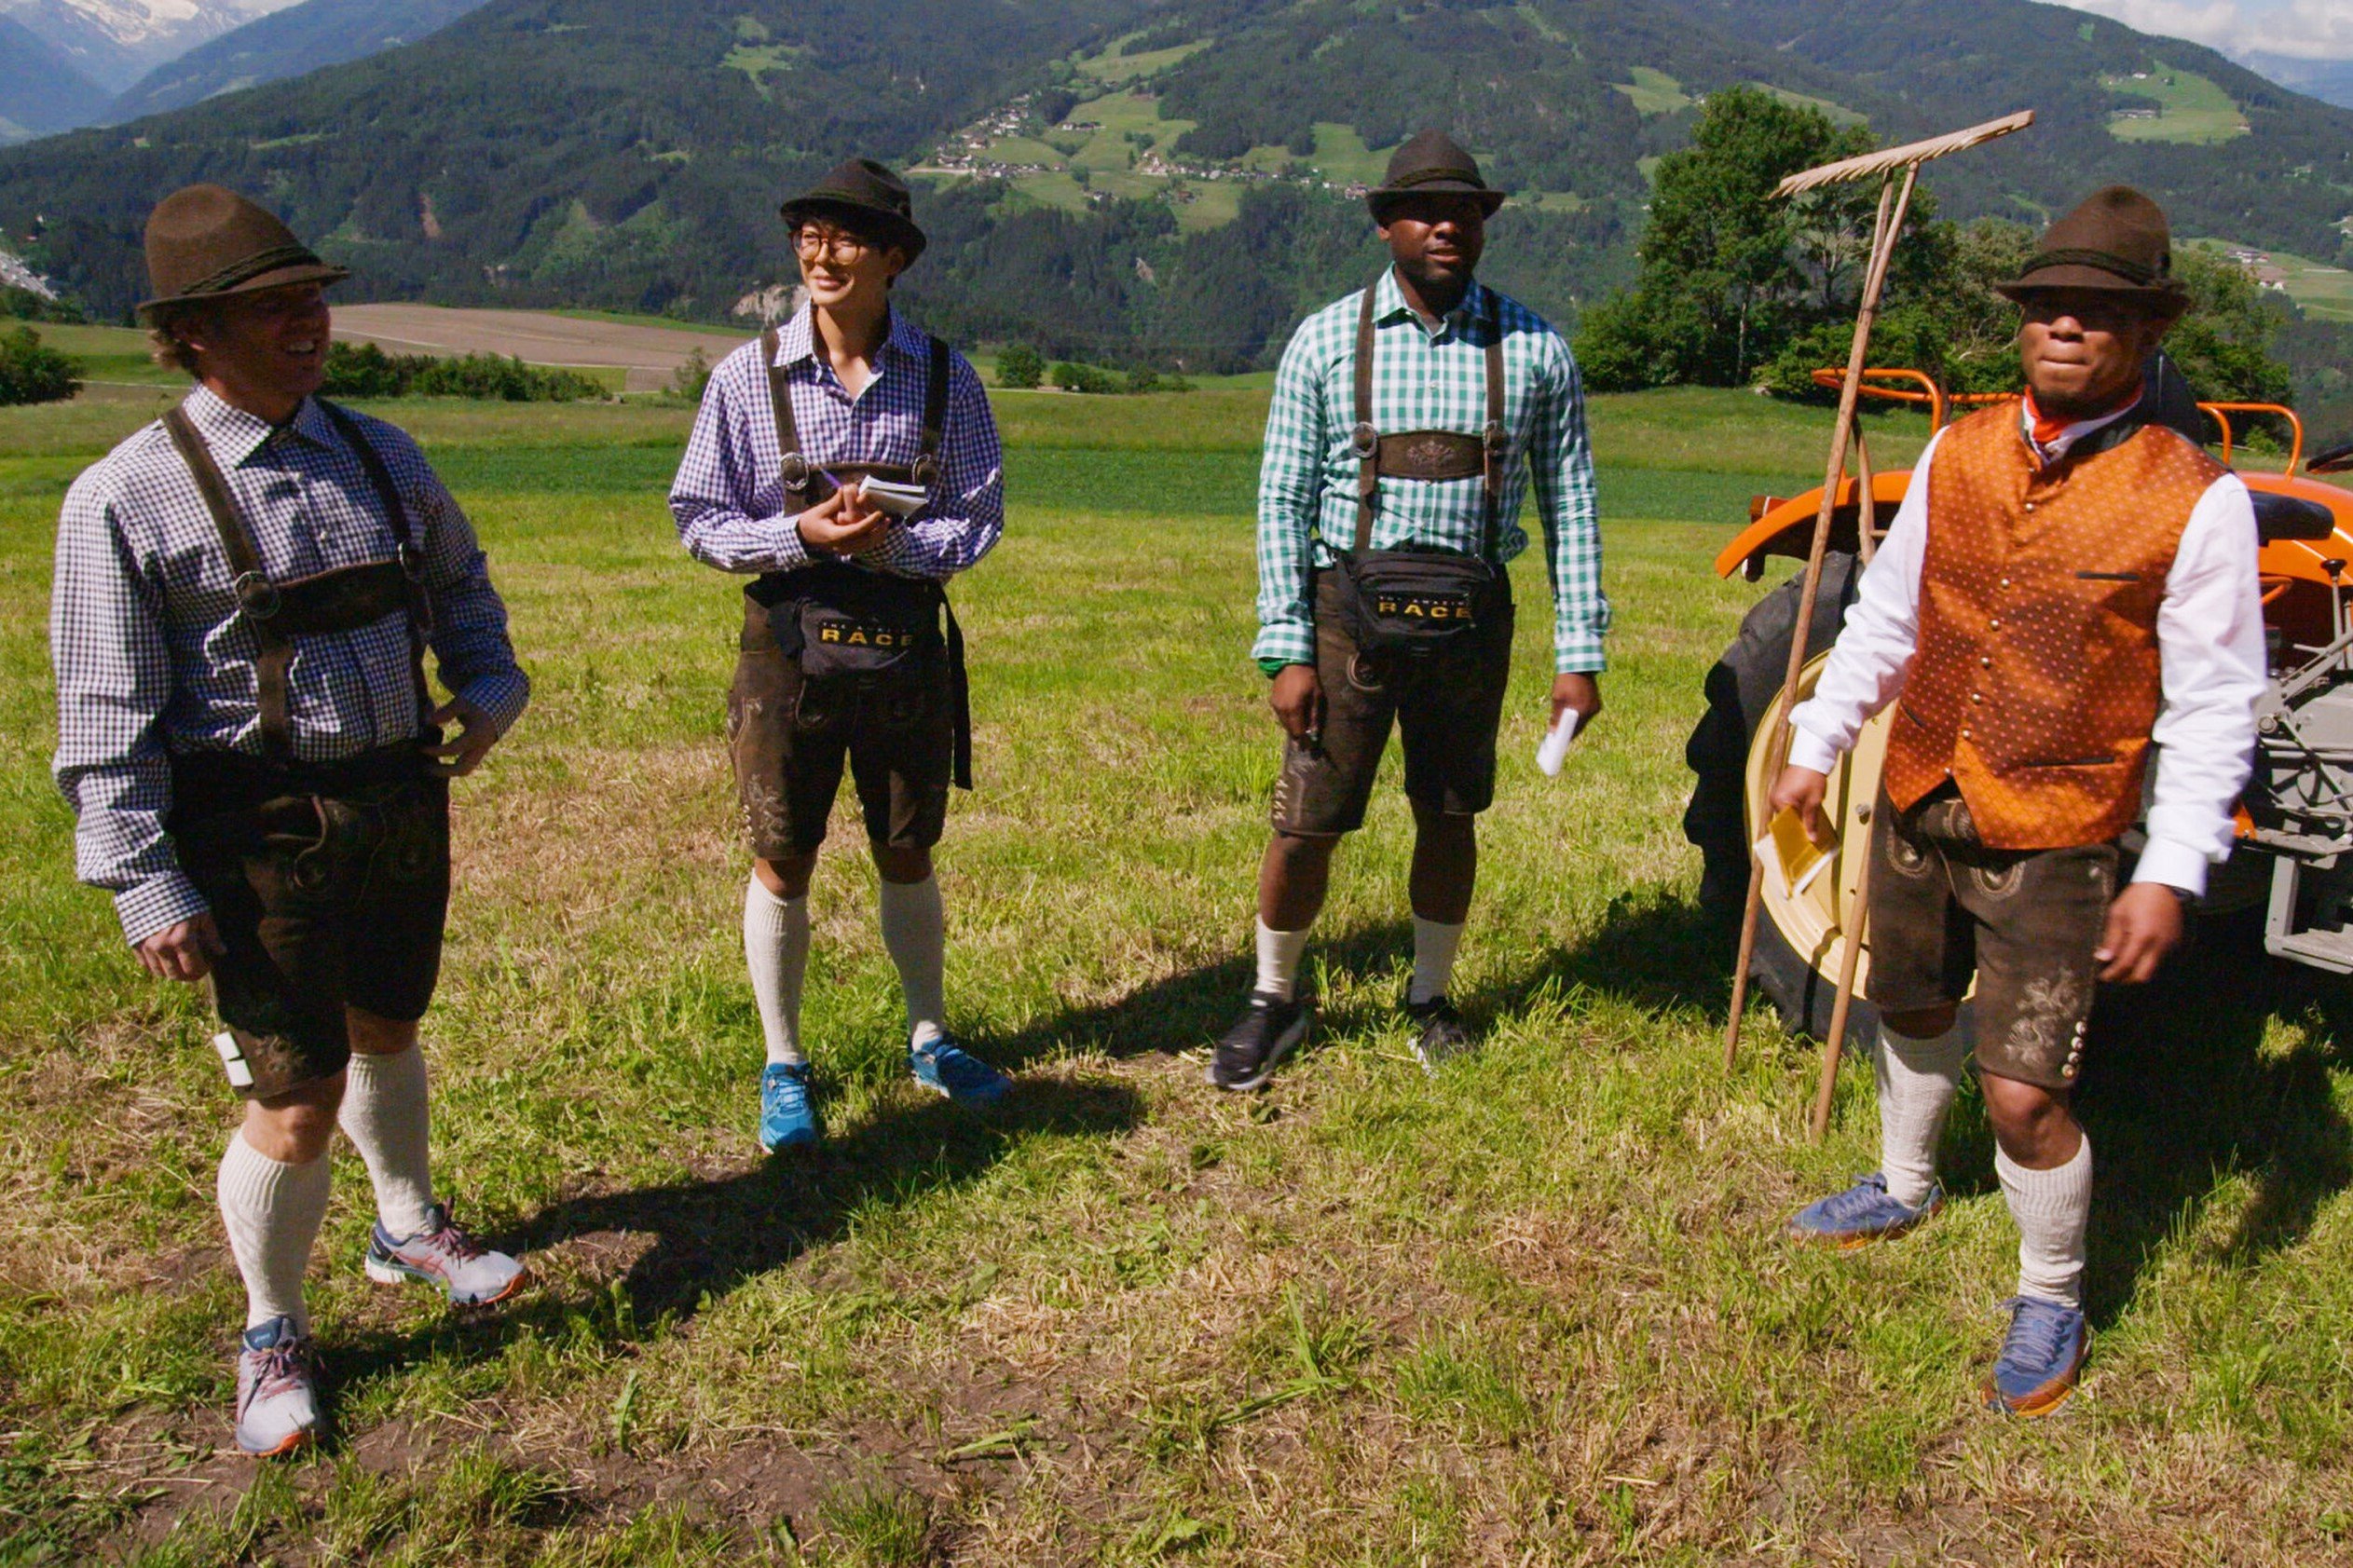 Tim Mann, Derek Xiao, Marcus Craig, and Lumumba Roberts, who compete in ' The Amazing Race' Season 34 on CBS, are surrounded by mountains in Austria, wearing yodeling outfits.